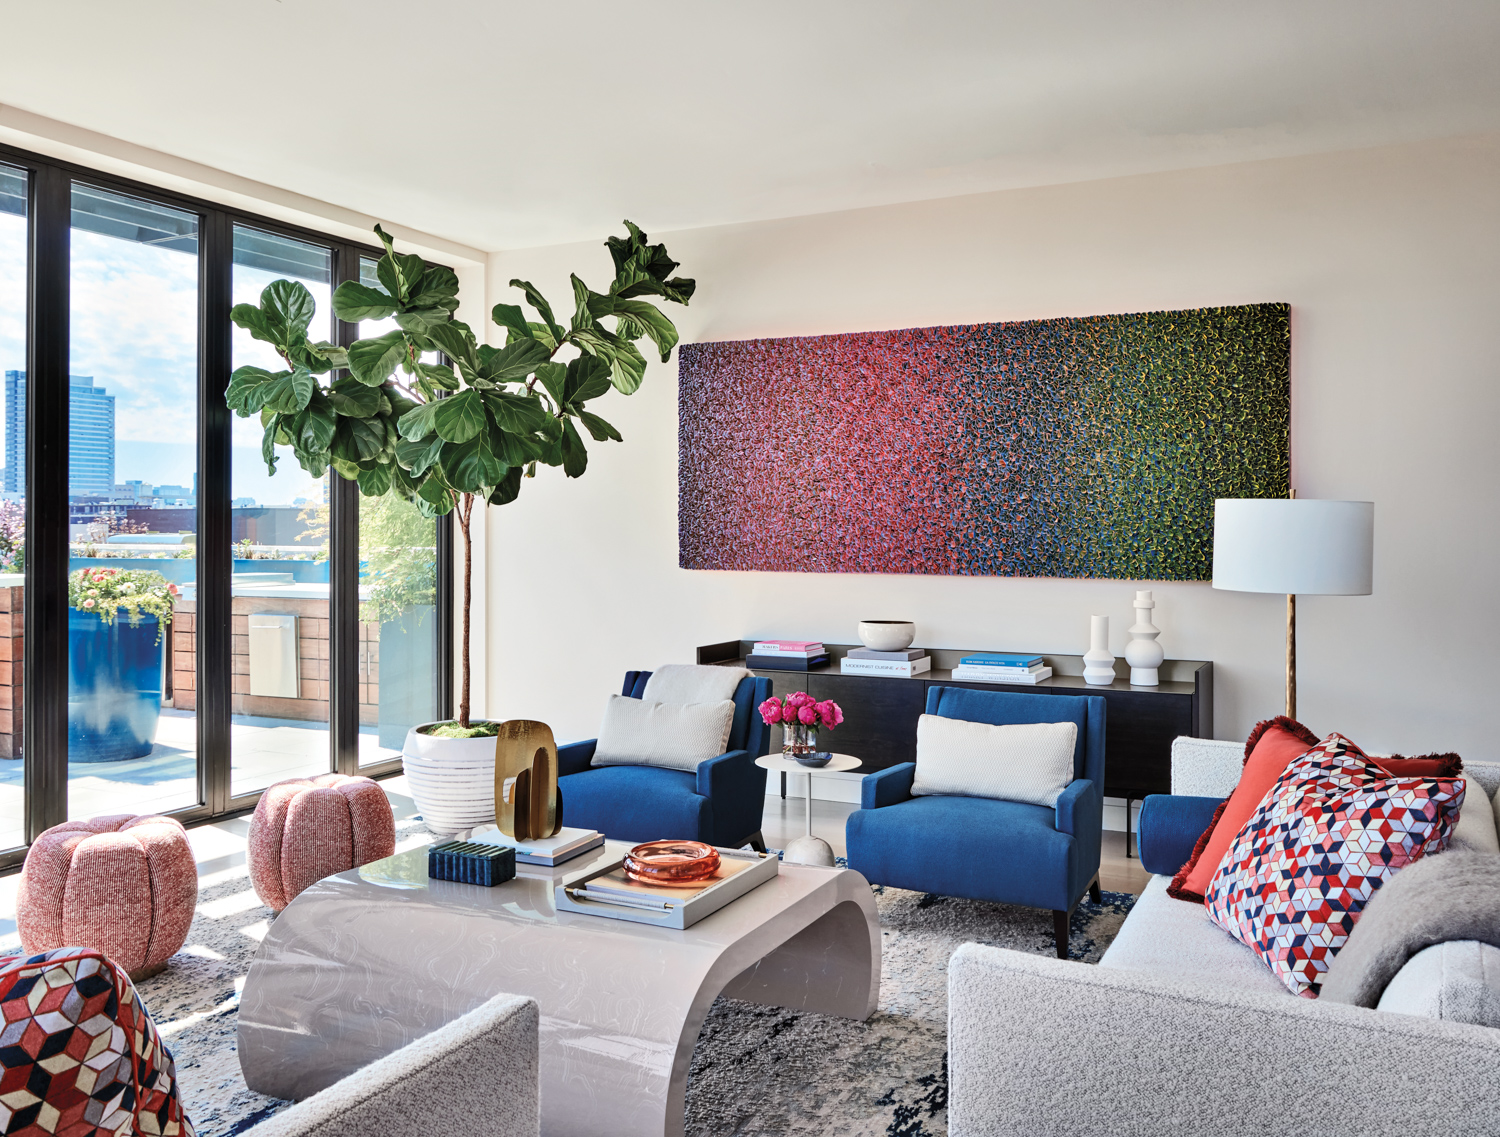 Living room with large, colorful abstract painting and two blue armchairs.